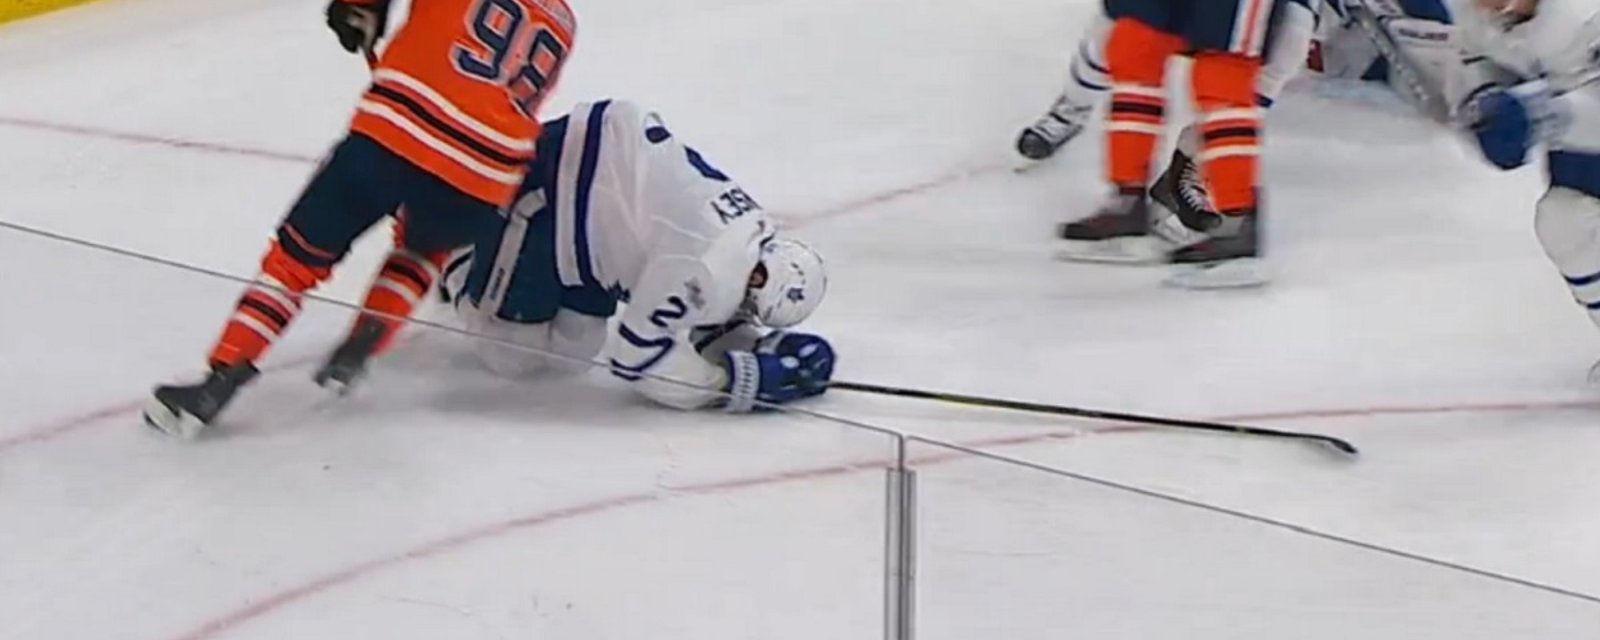 Breaking: Leafs defenseman leaves the game with an injury, has not returned.